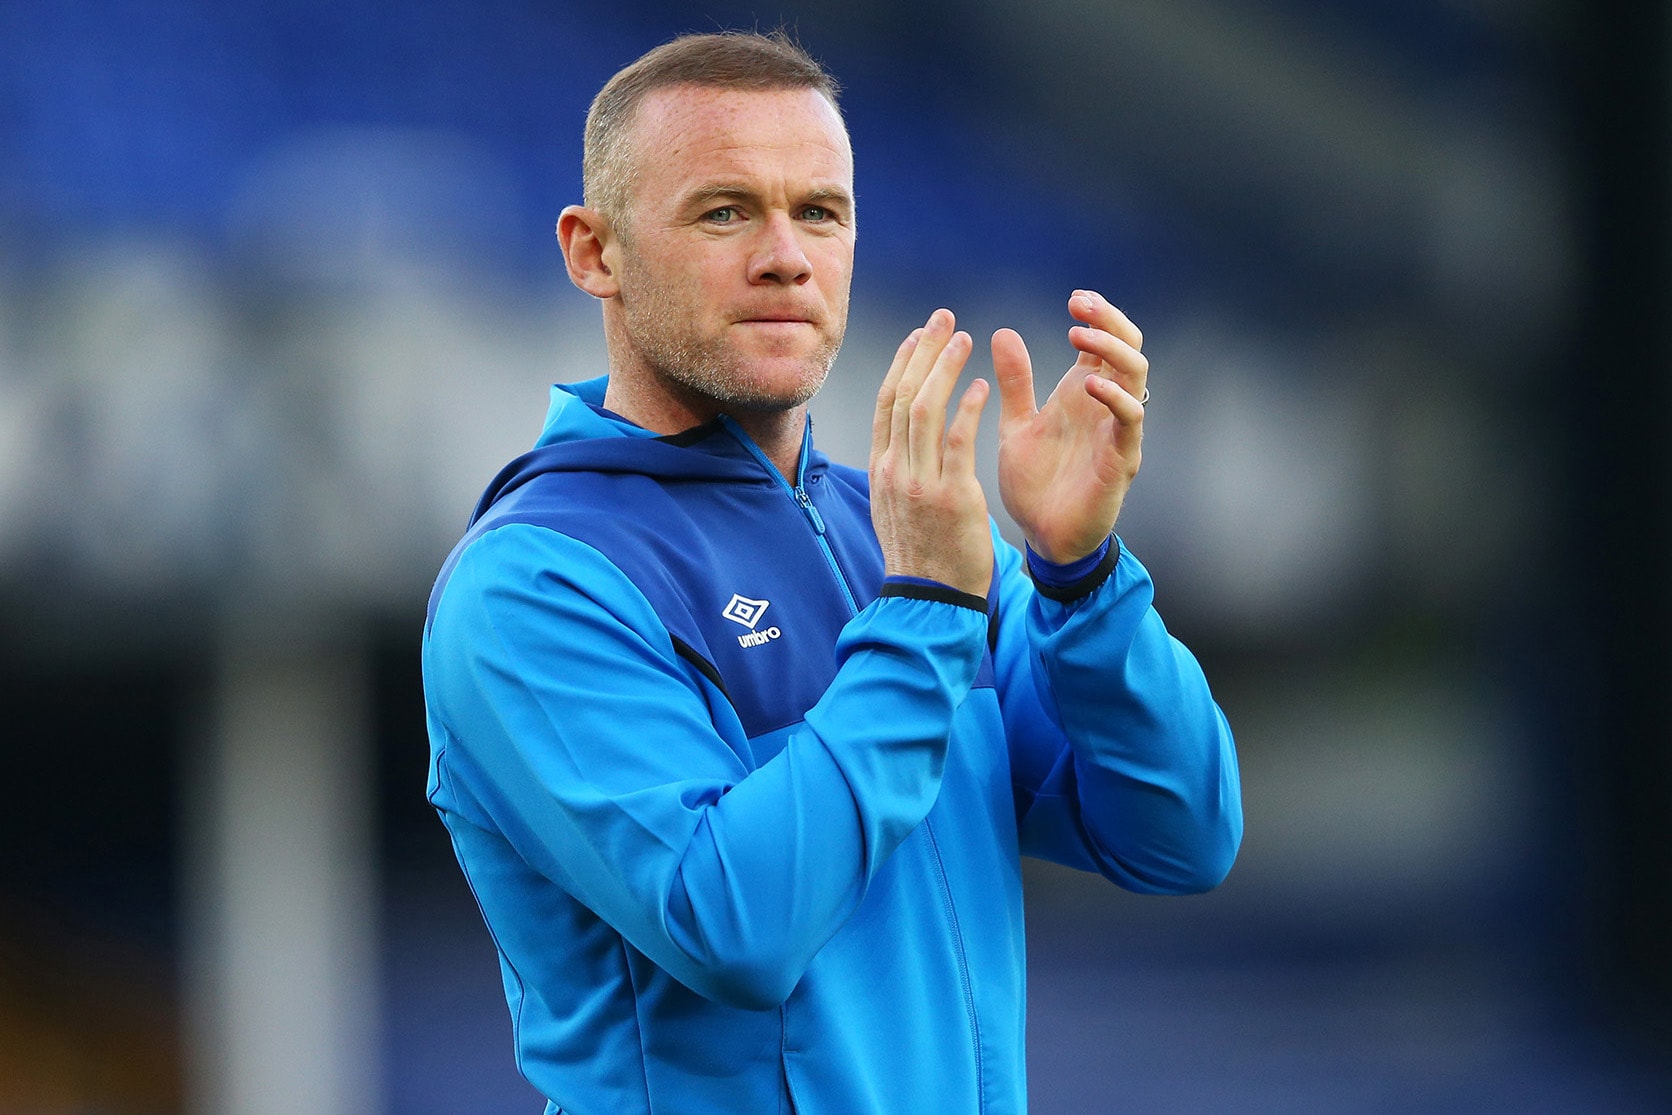 Wayne Rooney MLS DC United D.C. Football Soccer Manchester United Captain England Transfer Record Goalscorer Contract Details Wage Salary Length